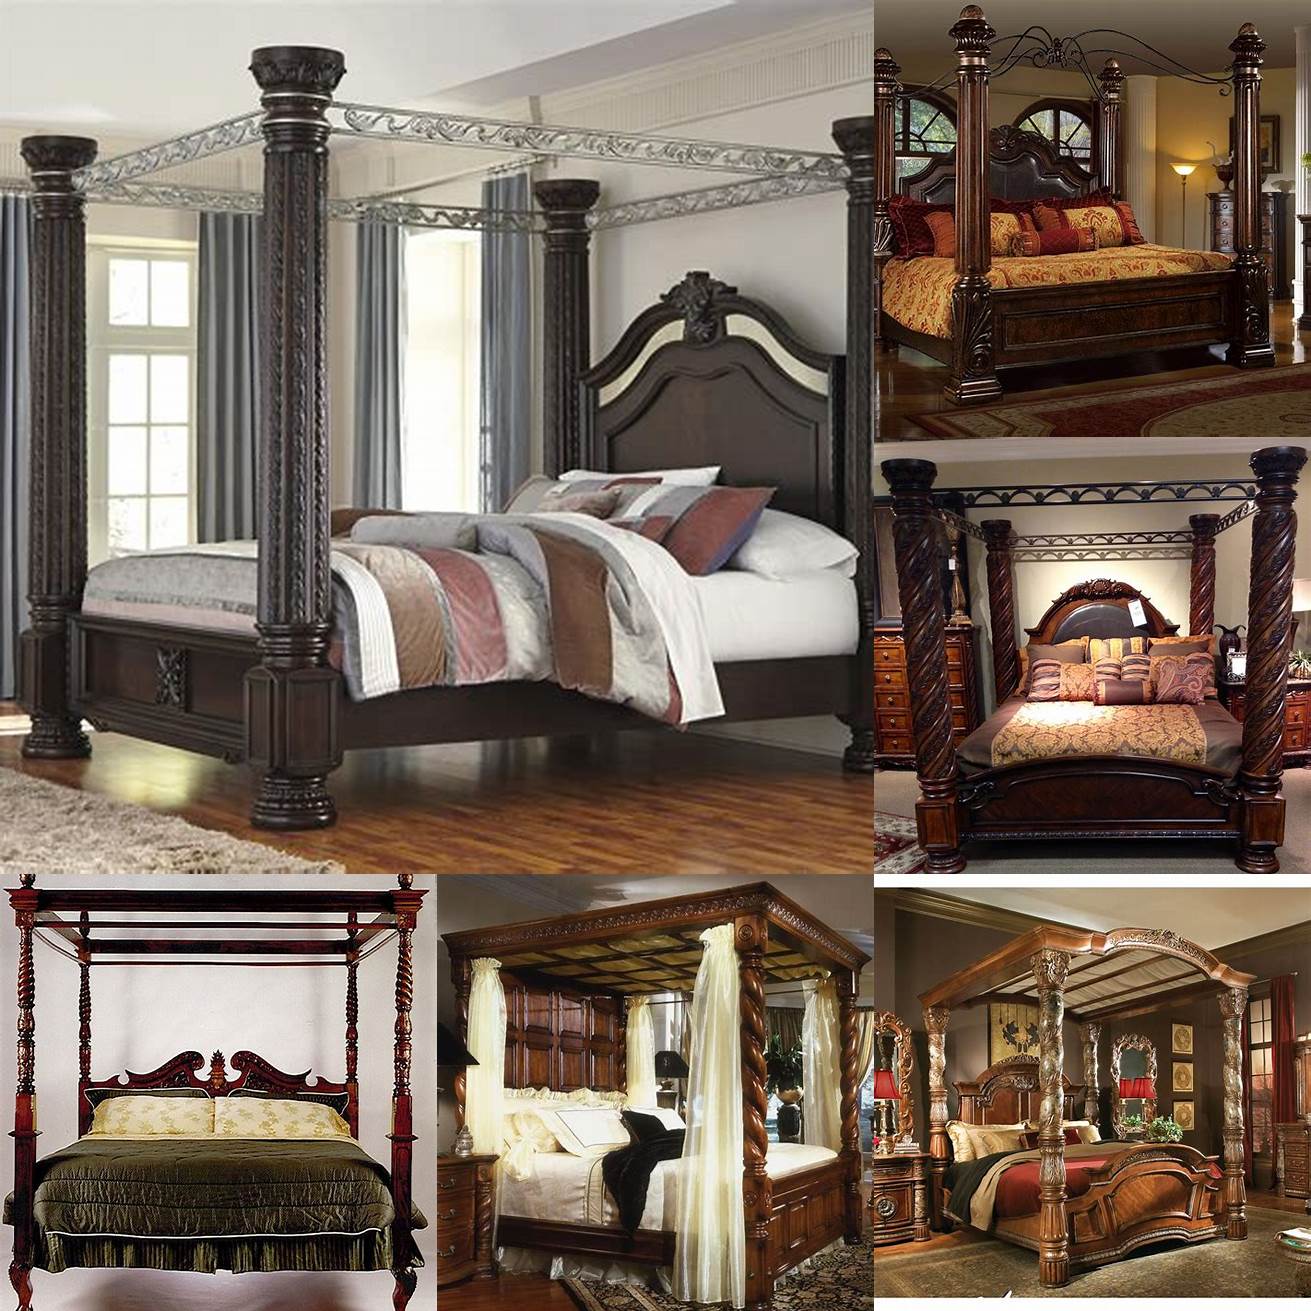 Canopy California King Bed This type of bed has a four-poster design and is perfect for people who want a luxurious look in their bedroom It is also ideal for people who want more privacy when sleeping